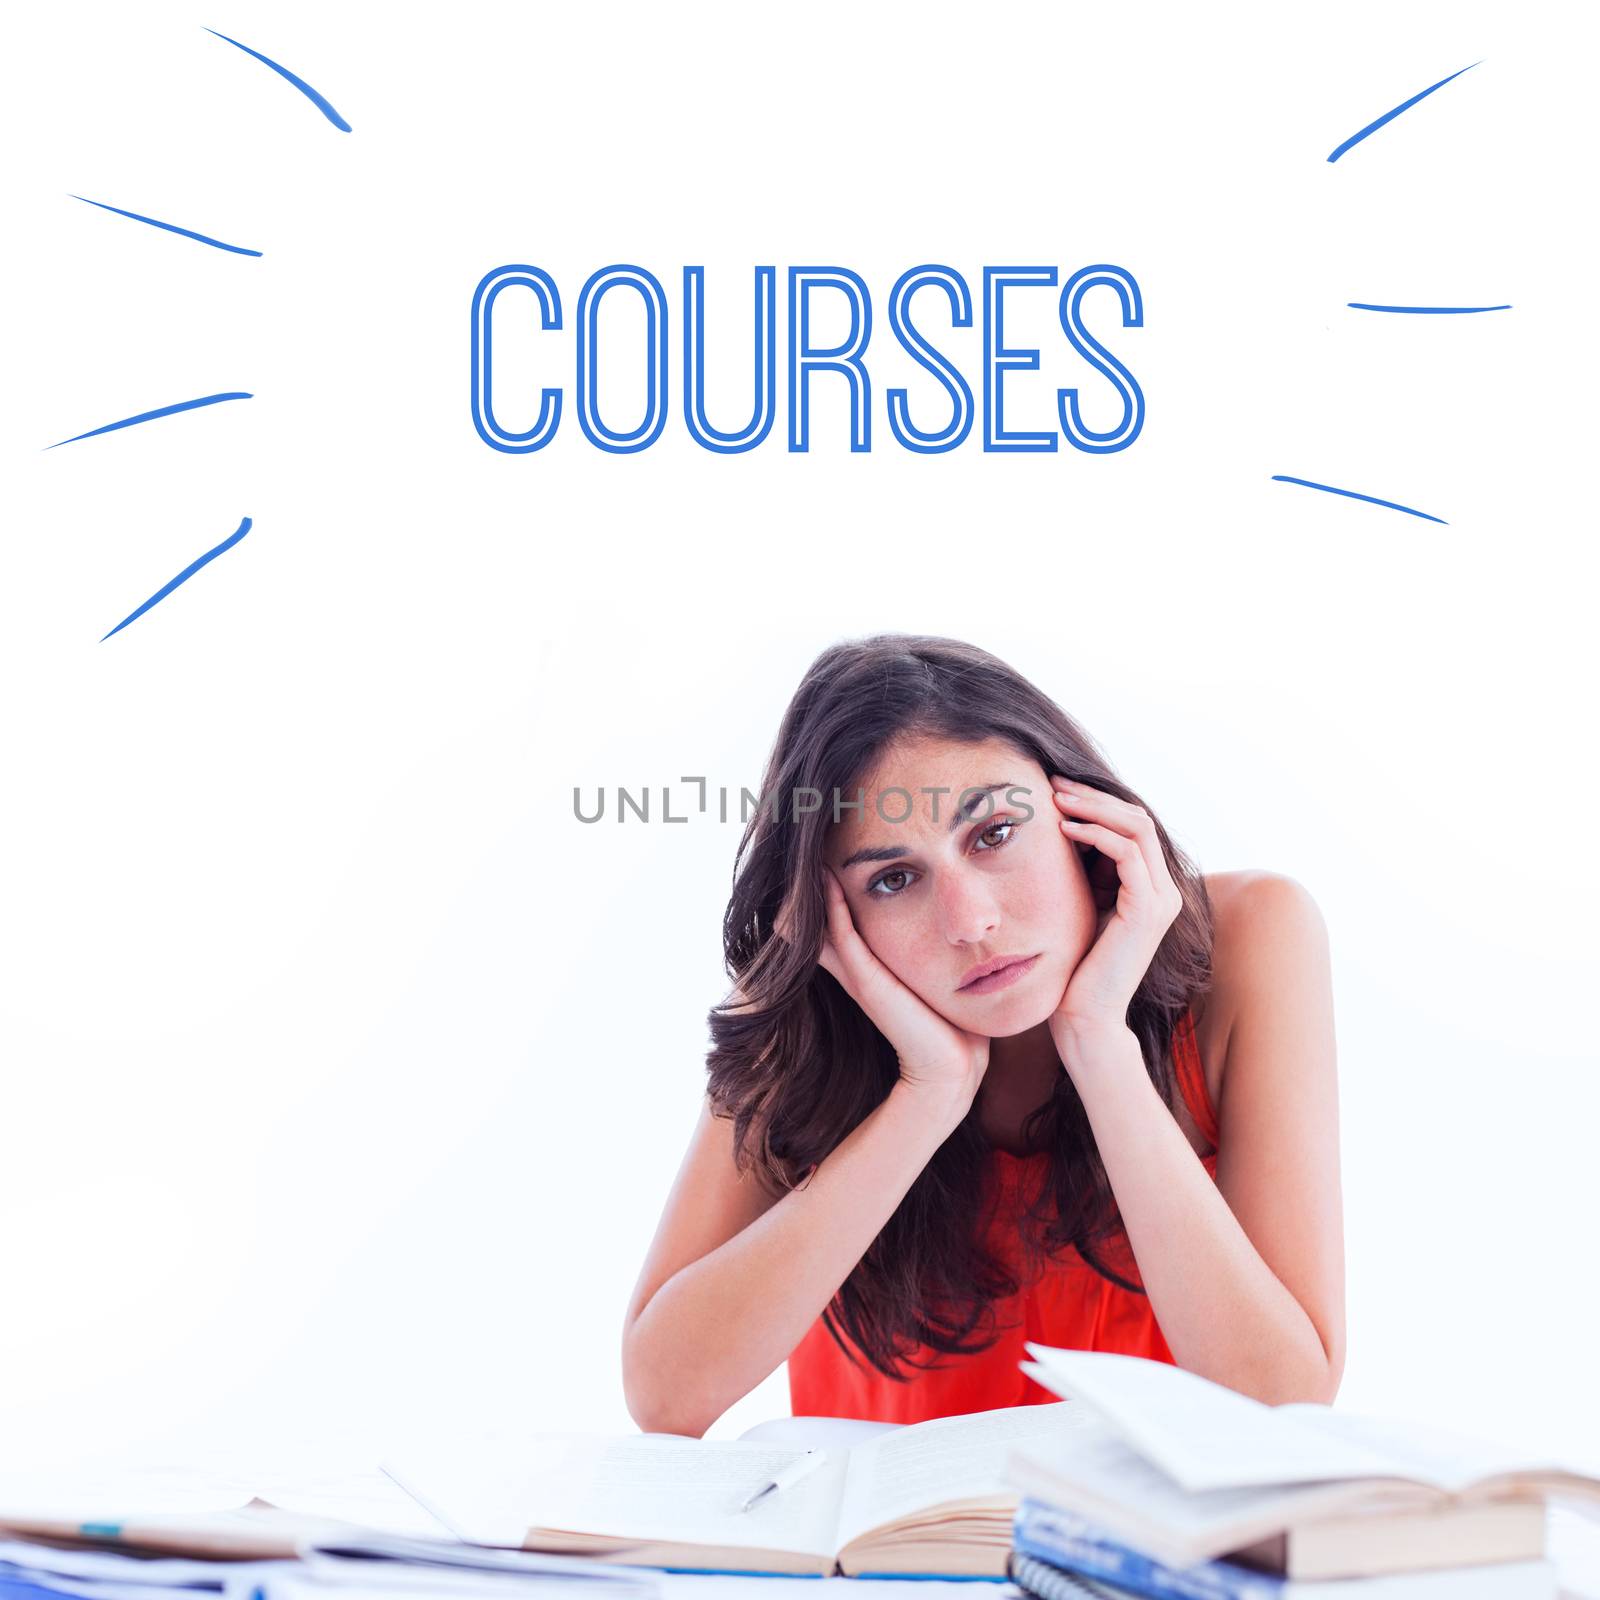 The word courses against stressed student at desk